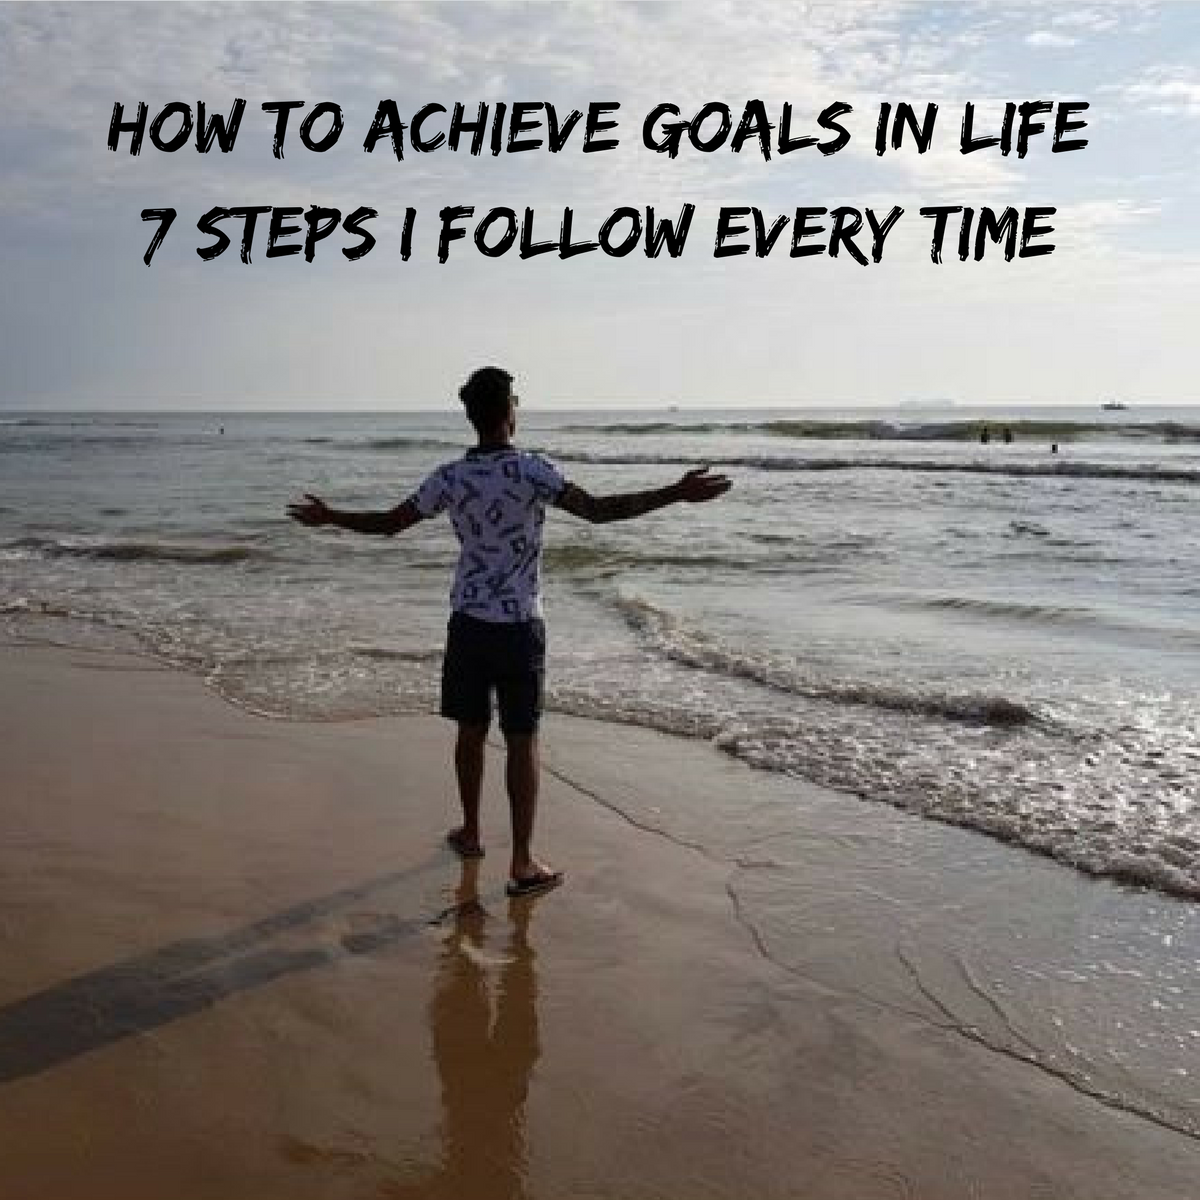 HOW TO ACHIEVE GOALS IN LIFE7 STEPS I FOLLOW EVERY TIME.png